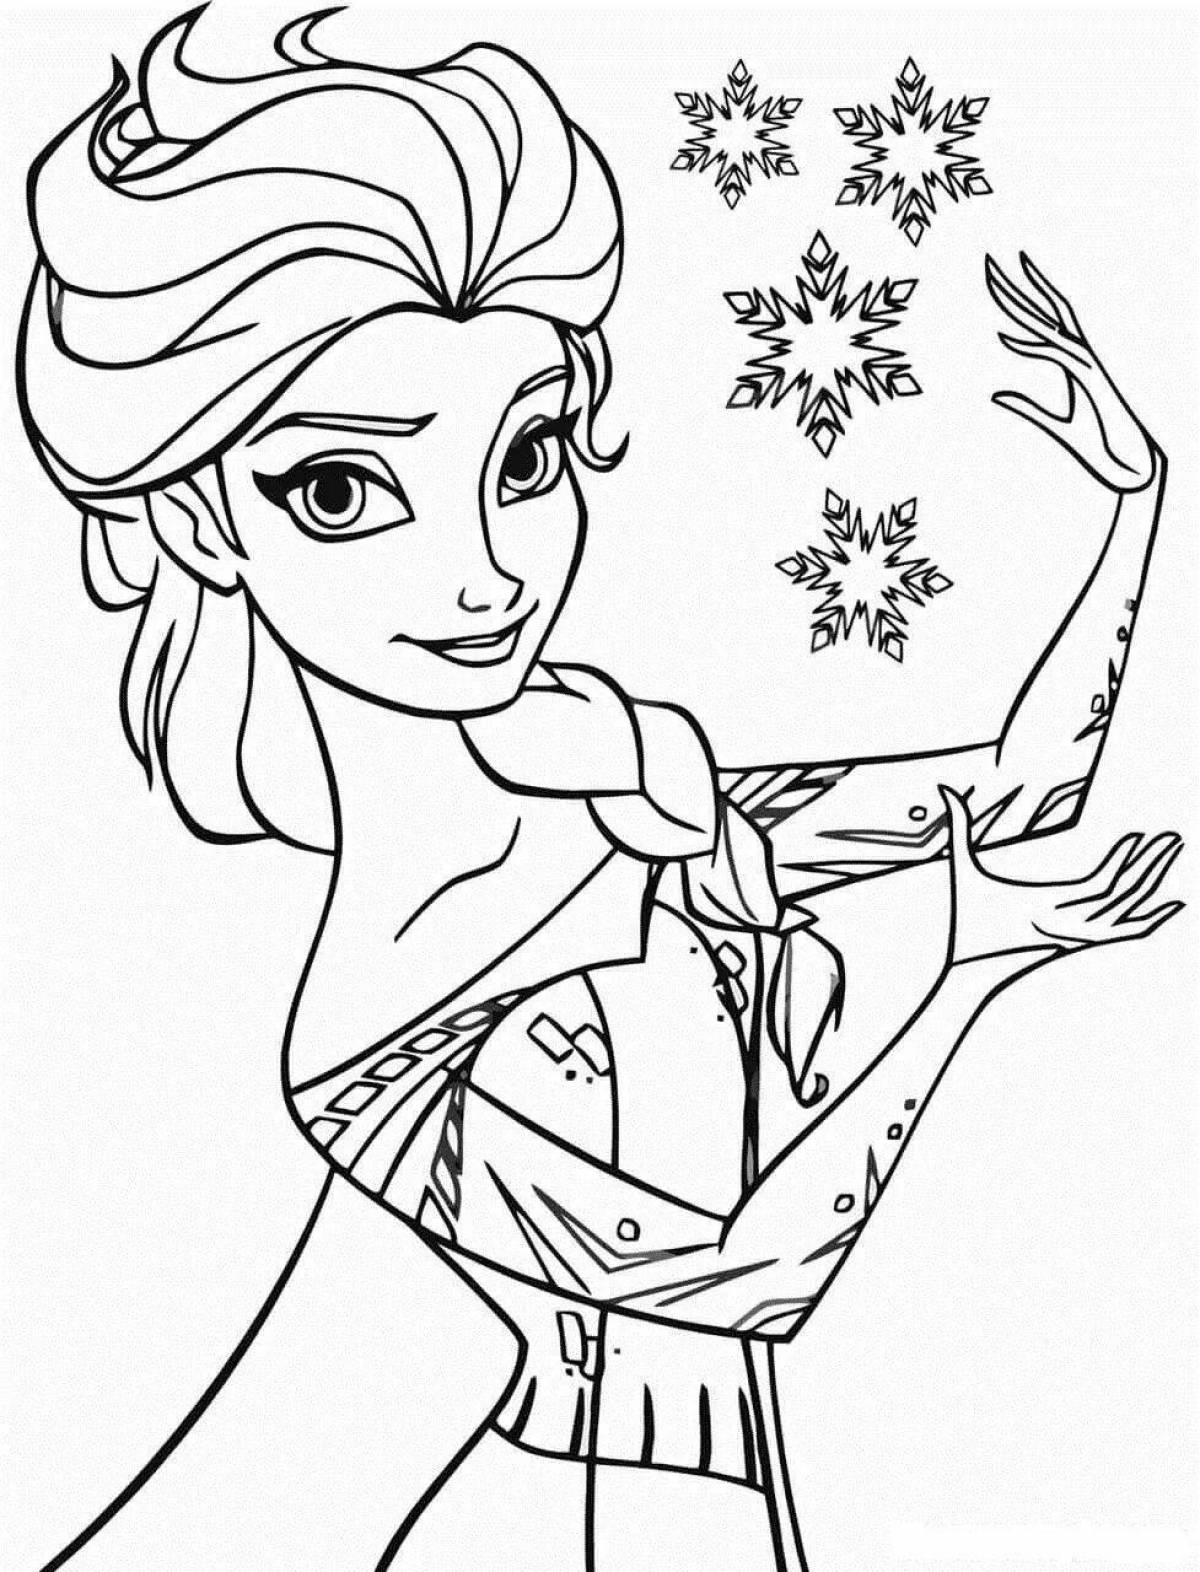 Elsa holiday coloring book for kids 5-6 years old